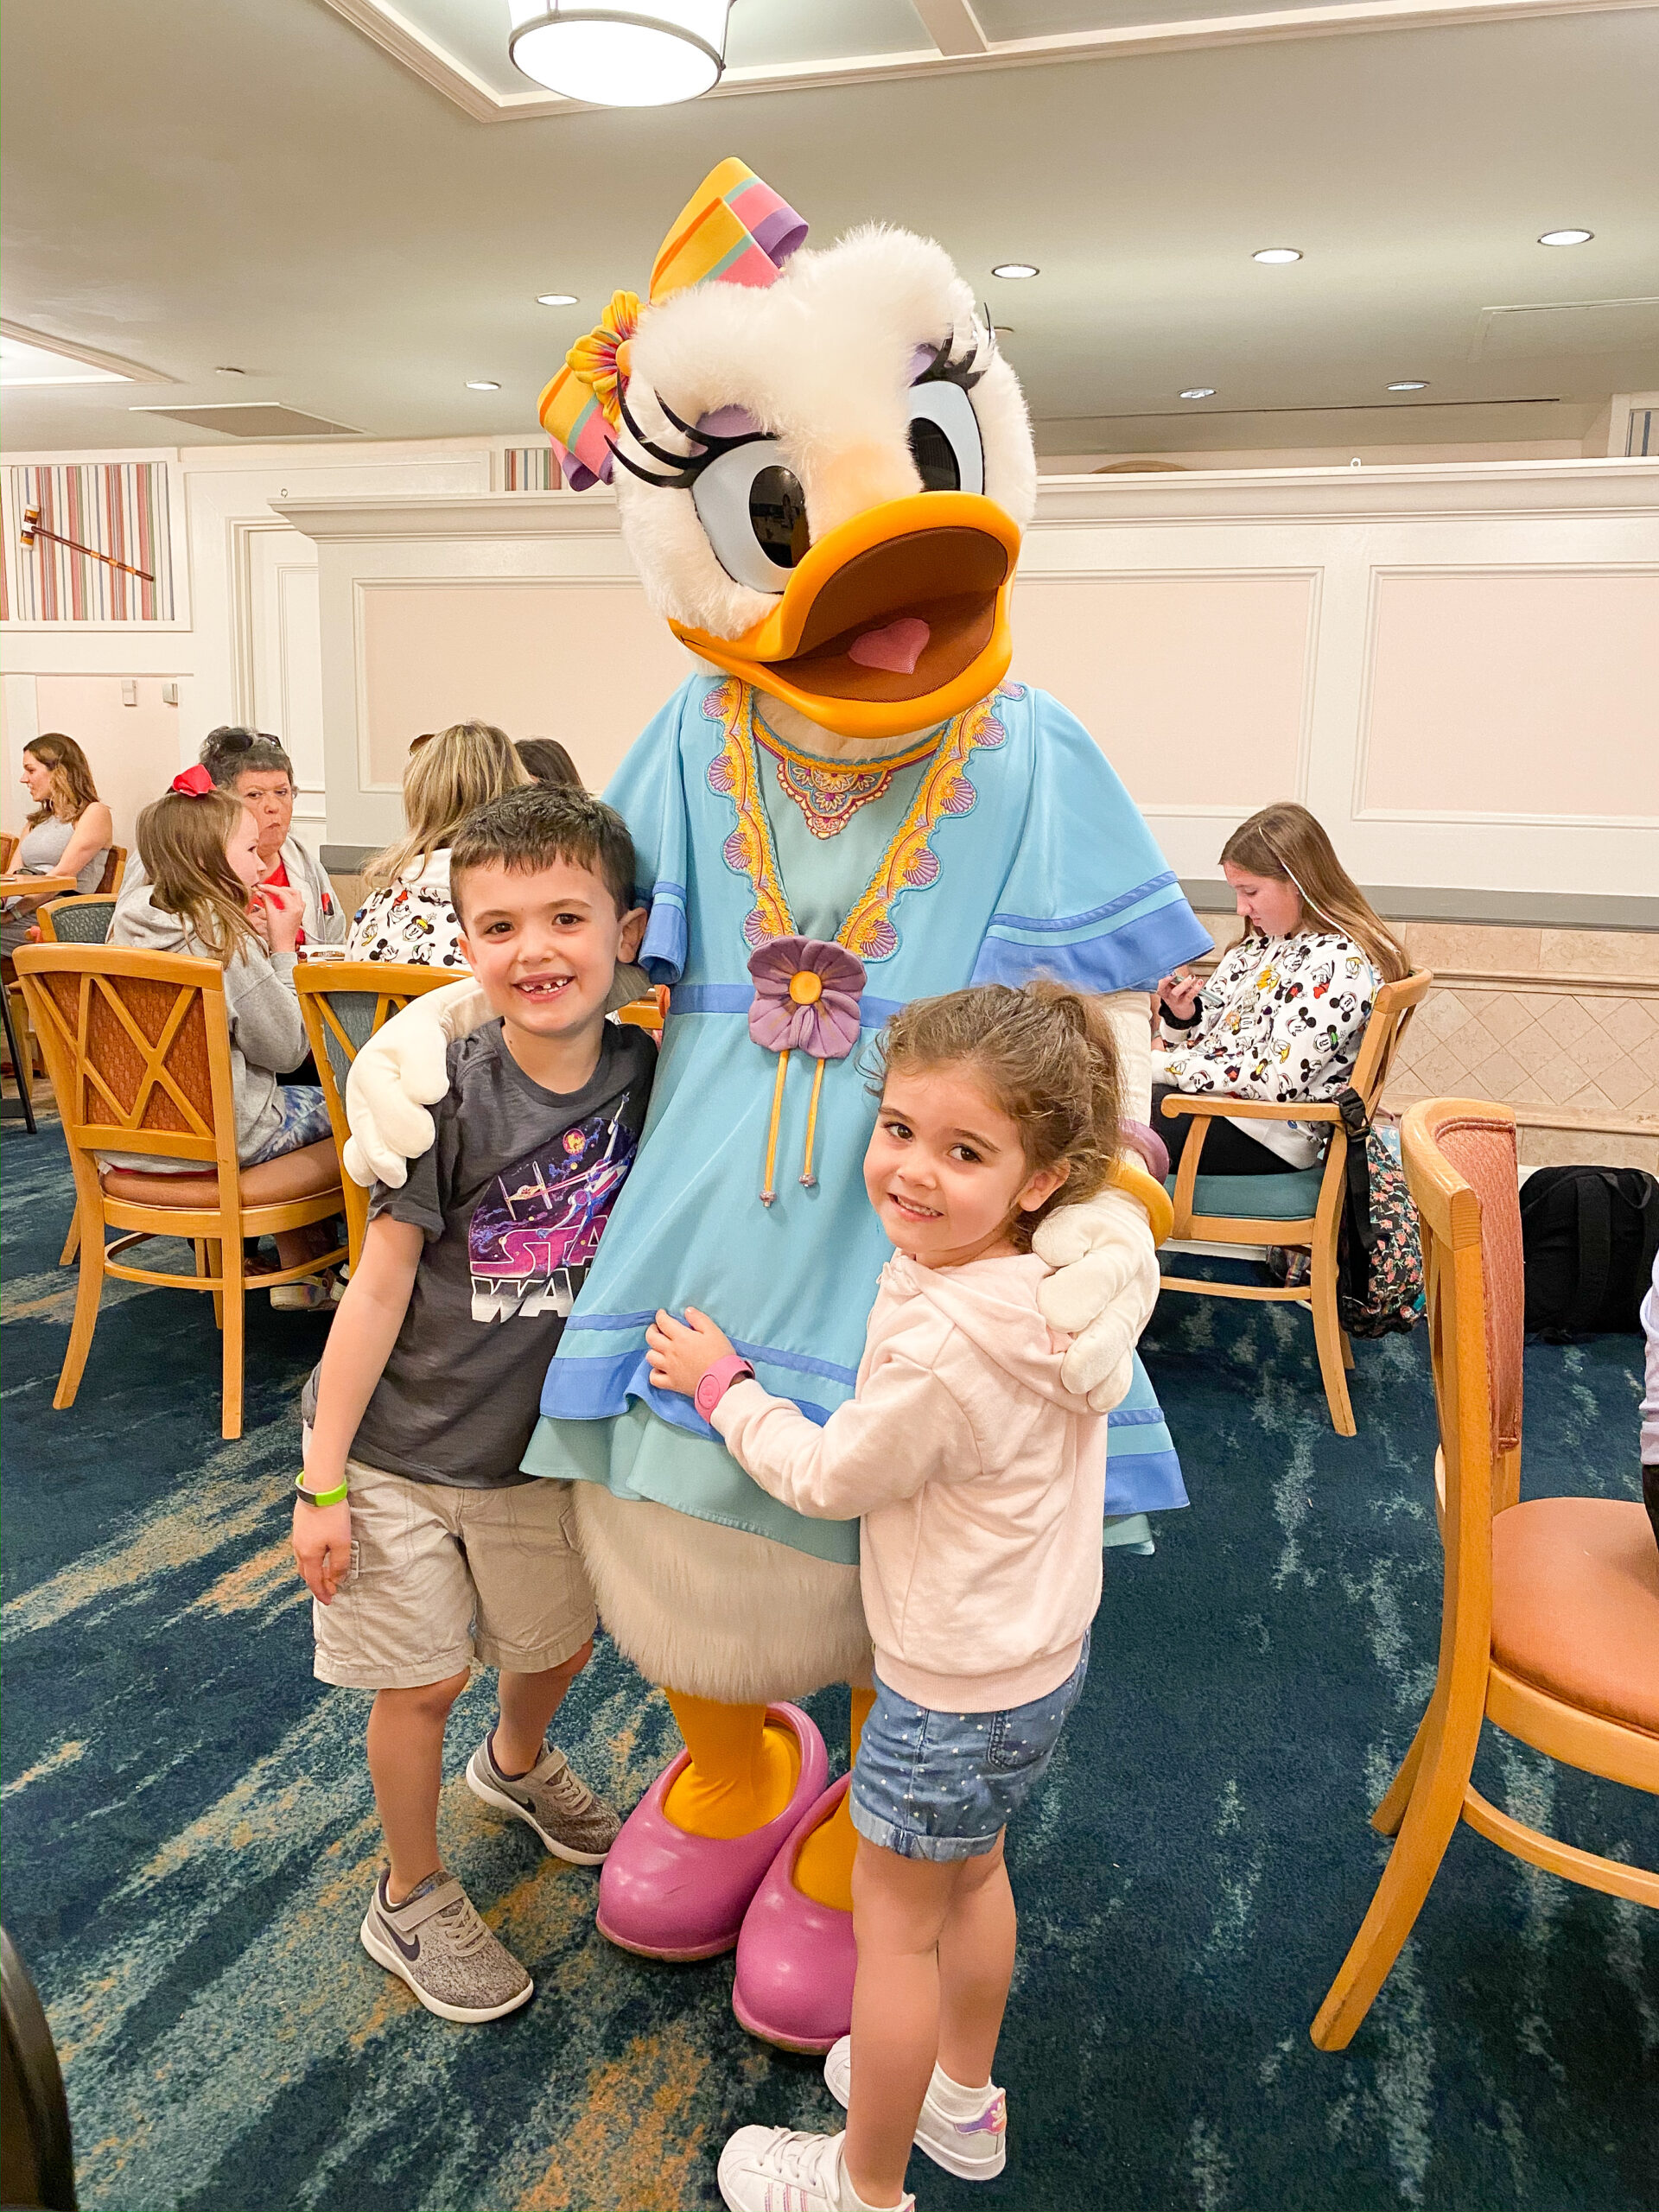 Looking for the best character dining at Walt Disney World? Connecitcut life and style blogger Lauren McBride shares her top choices.